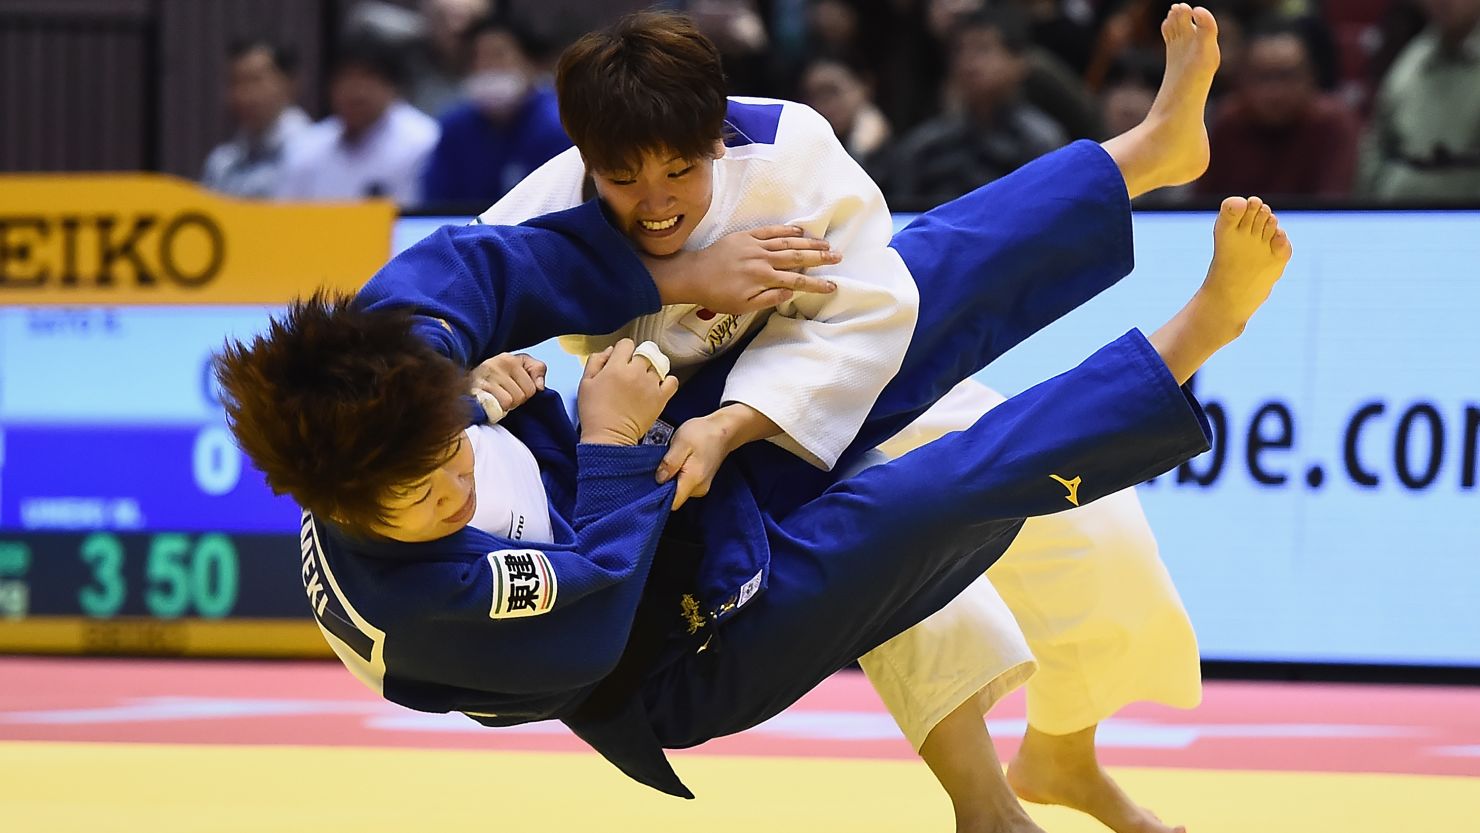 Judoka Ruika Sato (white) and Mami Umeki (blue) battle it out in December before the rule changes.